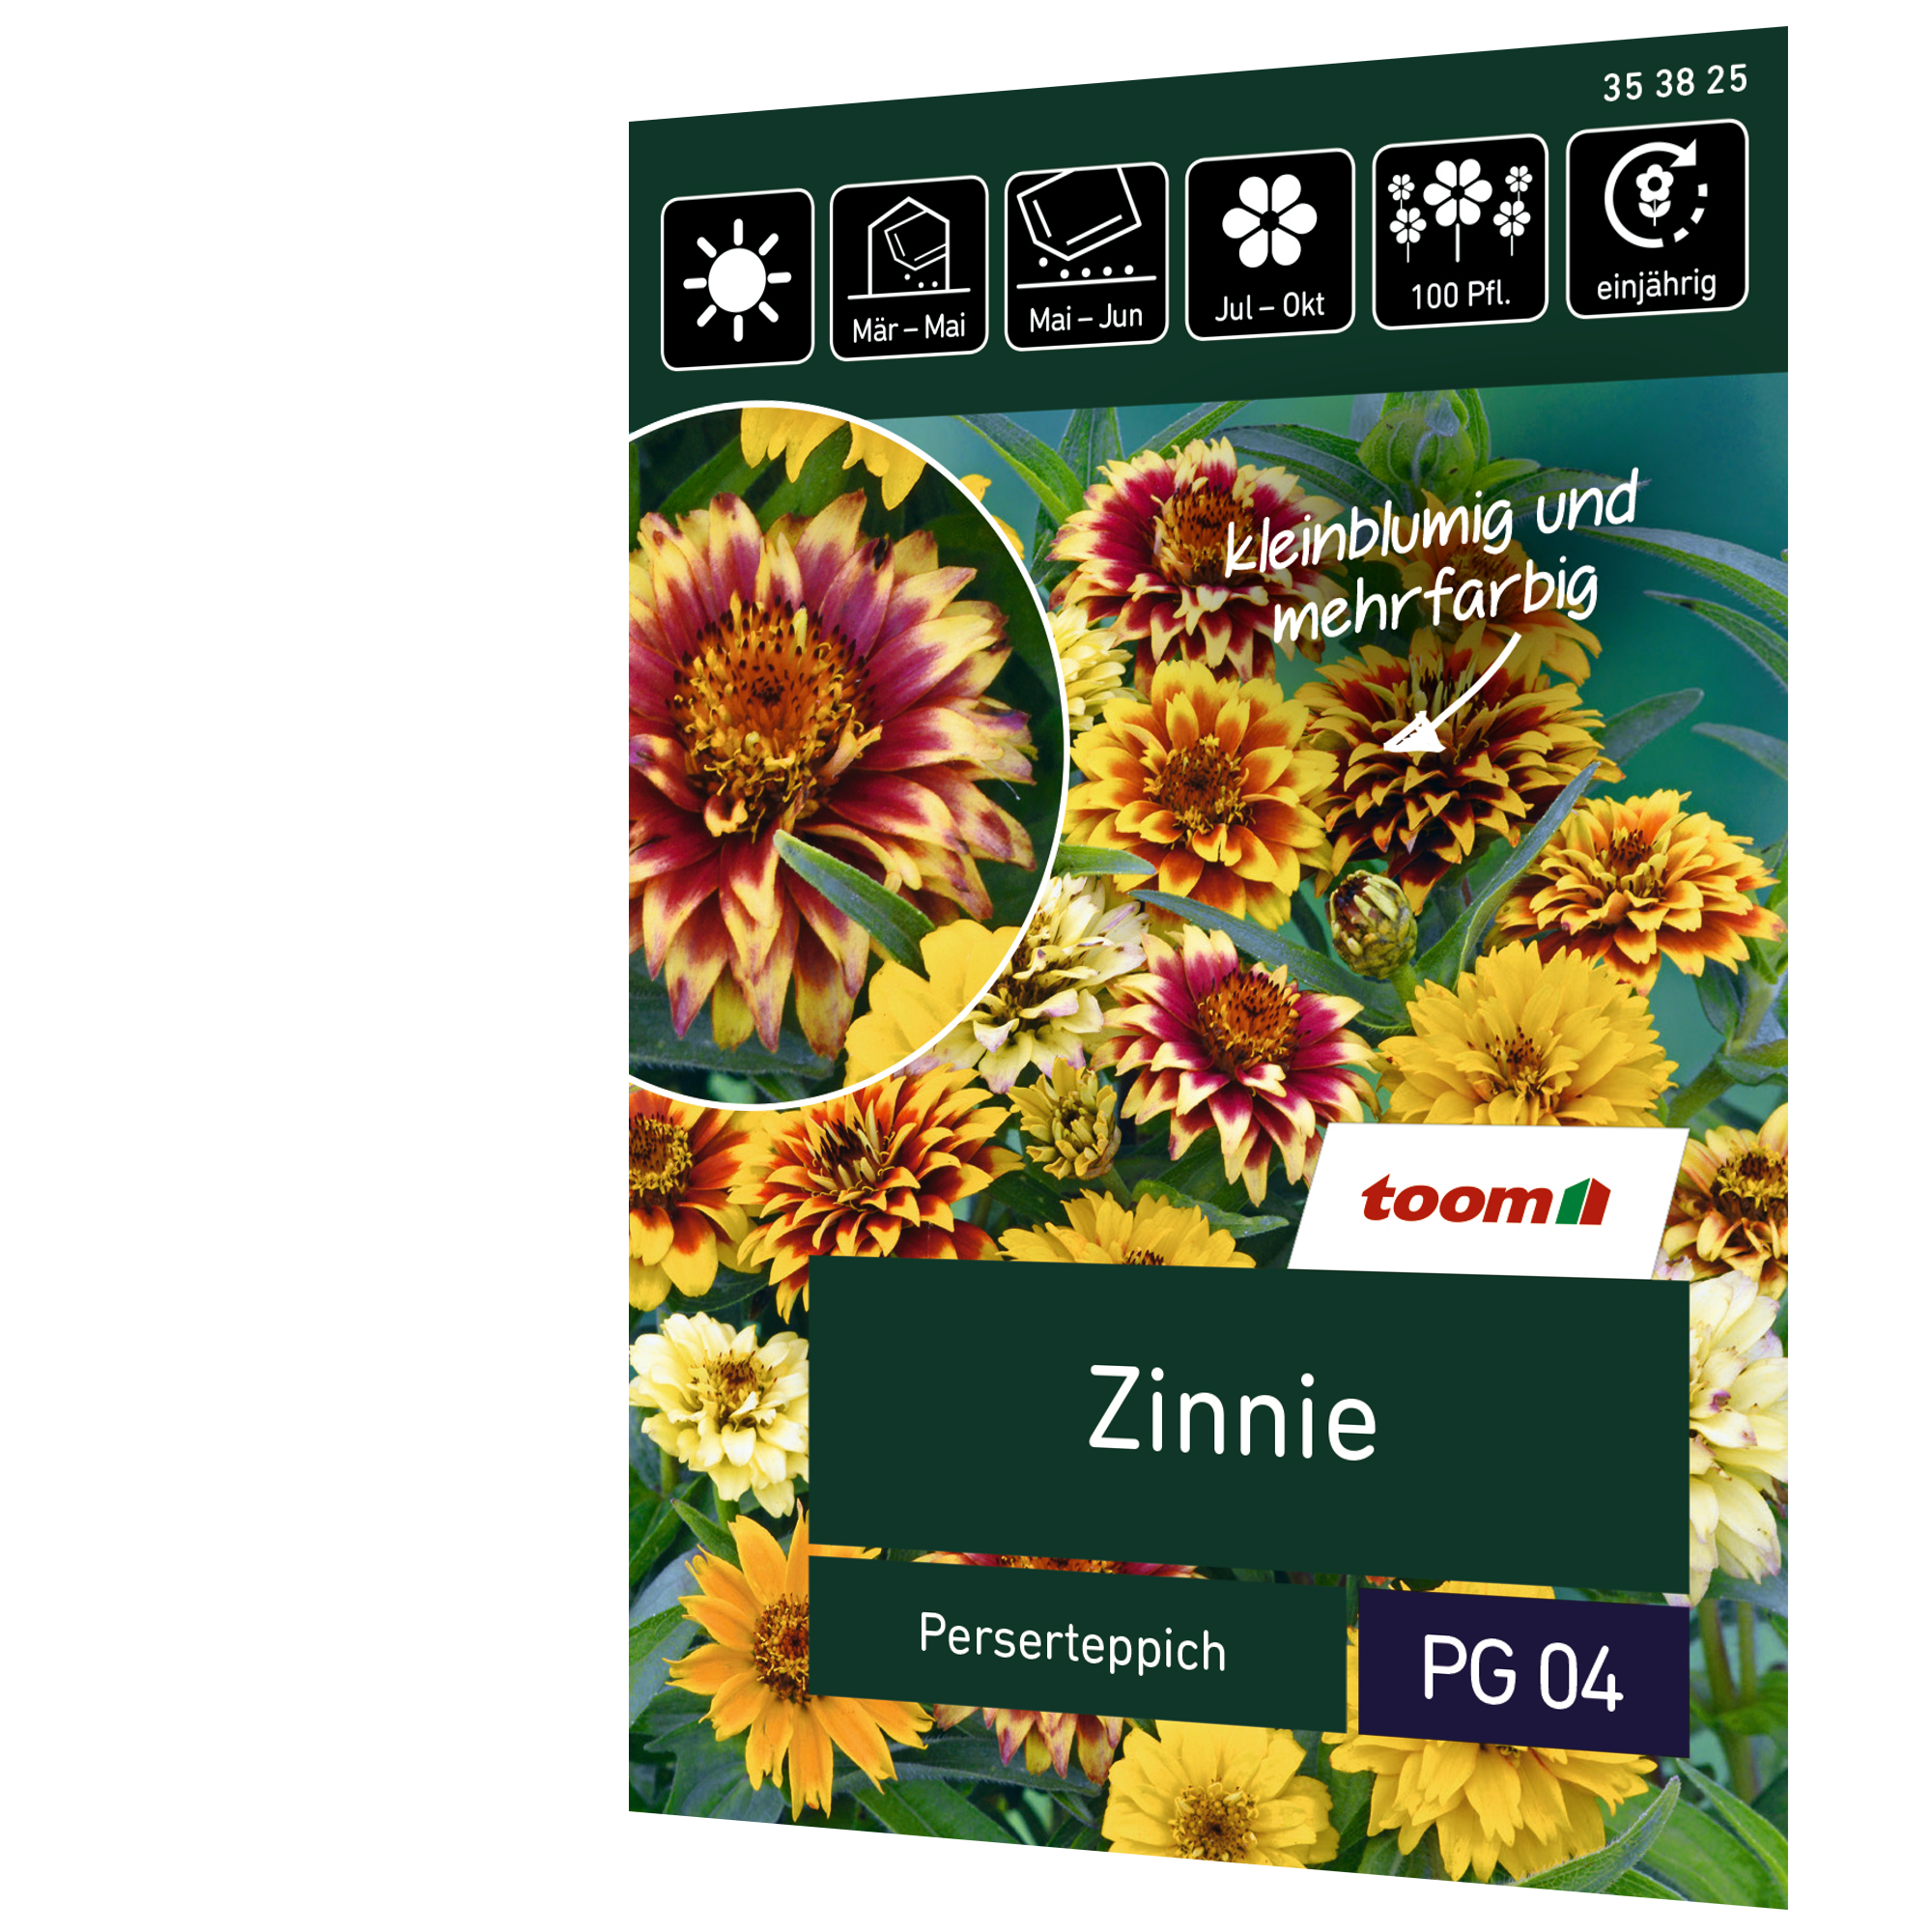 Zinnie 'Perserteppich' + product picture